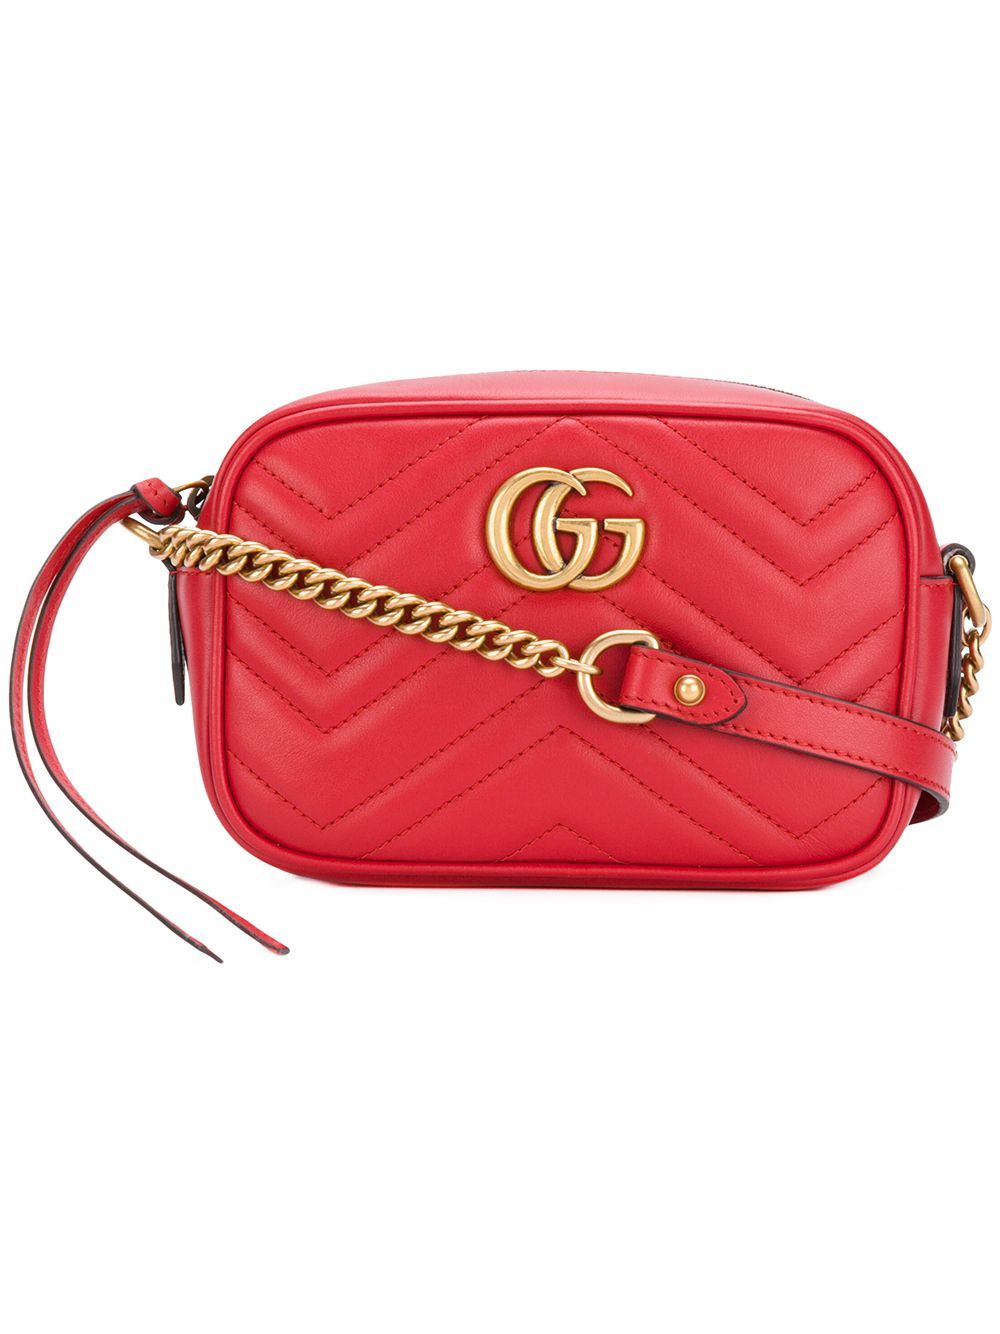 Gucci GG Marmont shoulder bag - Red | FarFetch US